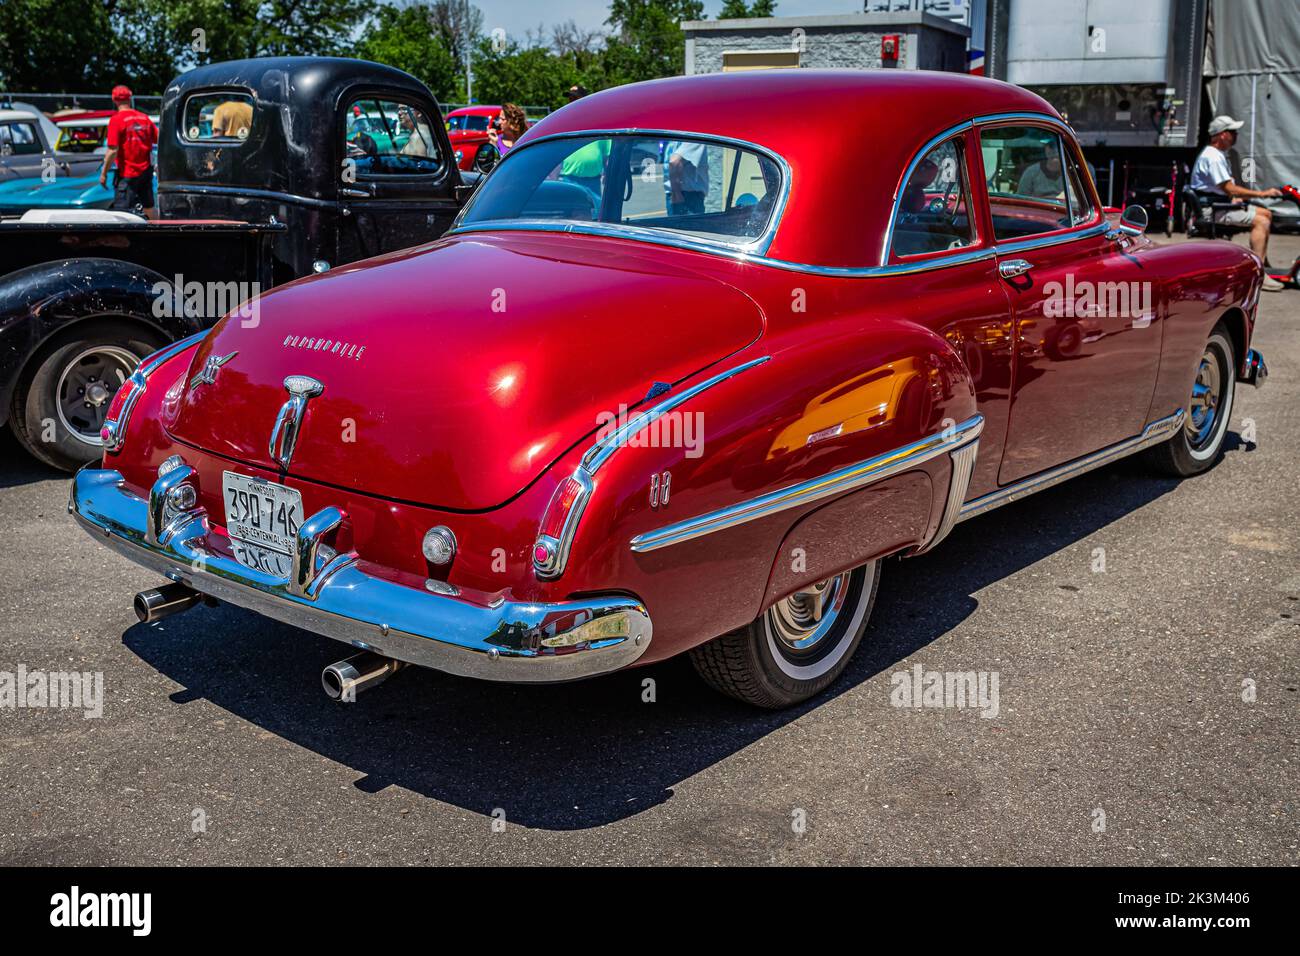 Falcon Heights, MN - June 18, 2022: High perspective rear corner view of a 1949 Oldsmobile Rocket 88 Coupe at a local car show. Stock Photo